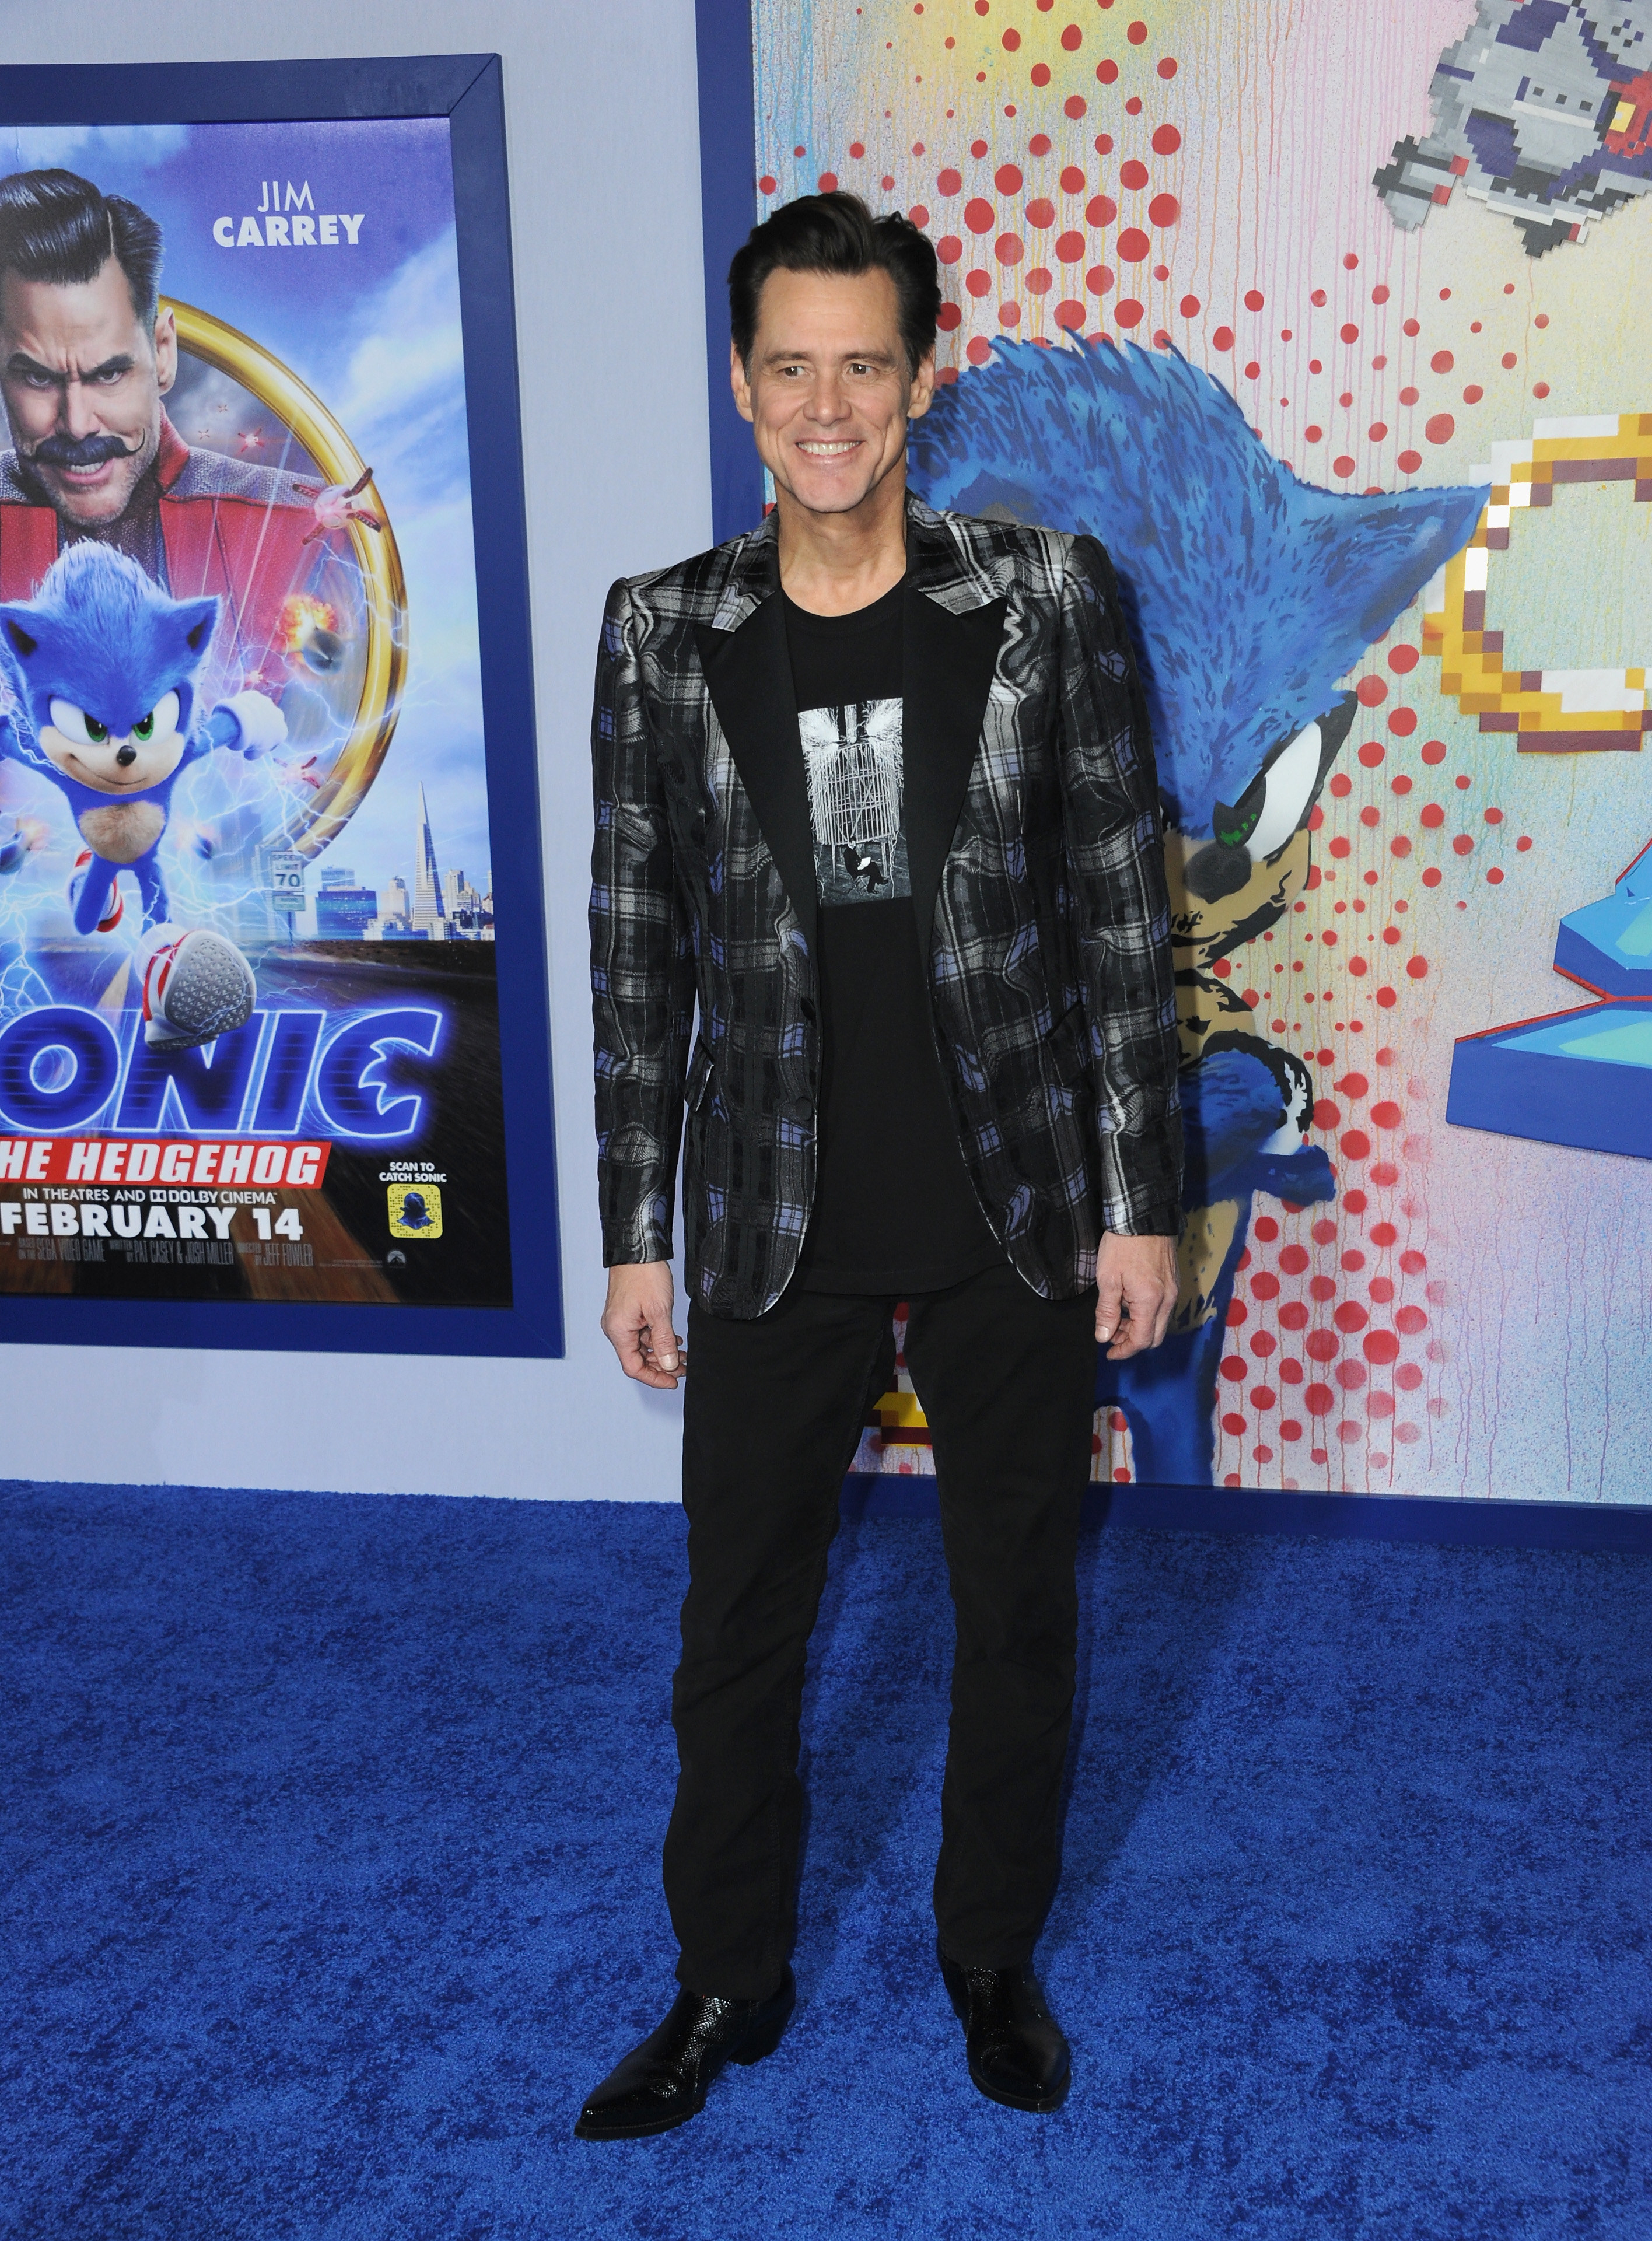 Jim Carrey wearing a plain blazer and t-shirt at the premiere for Sonic the Hedgehog